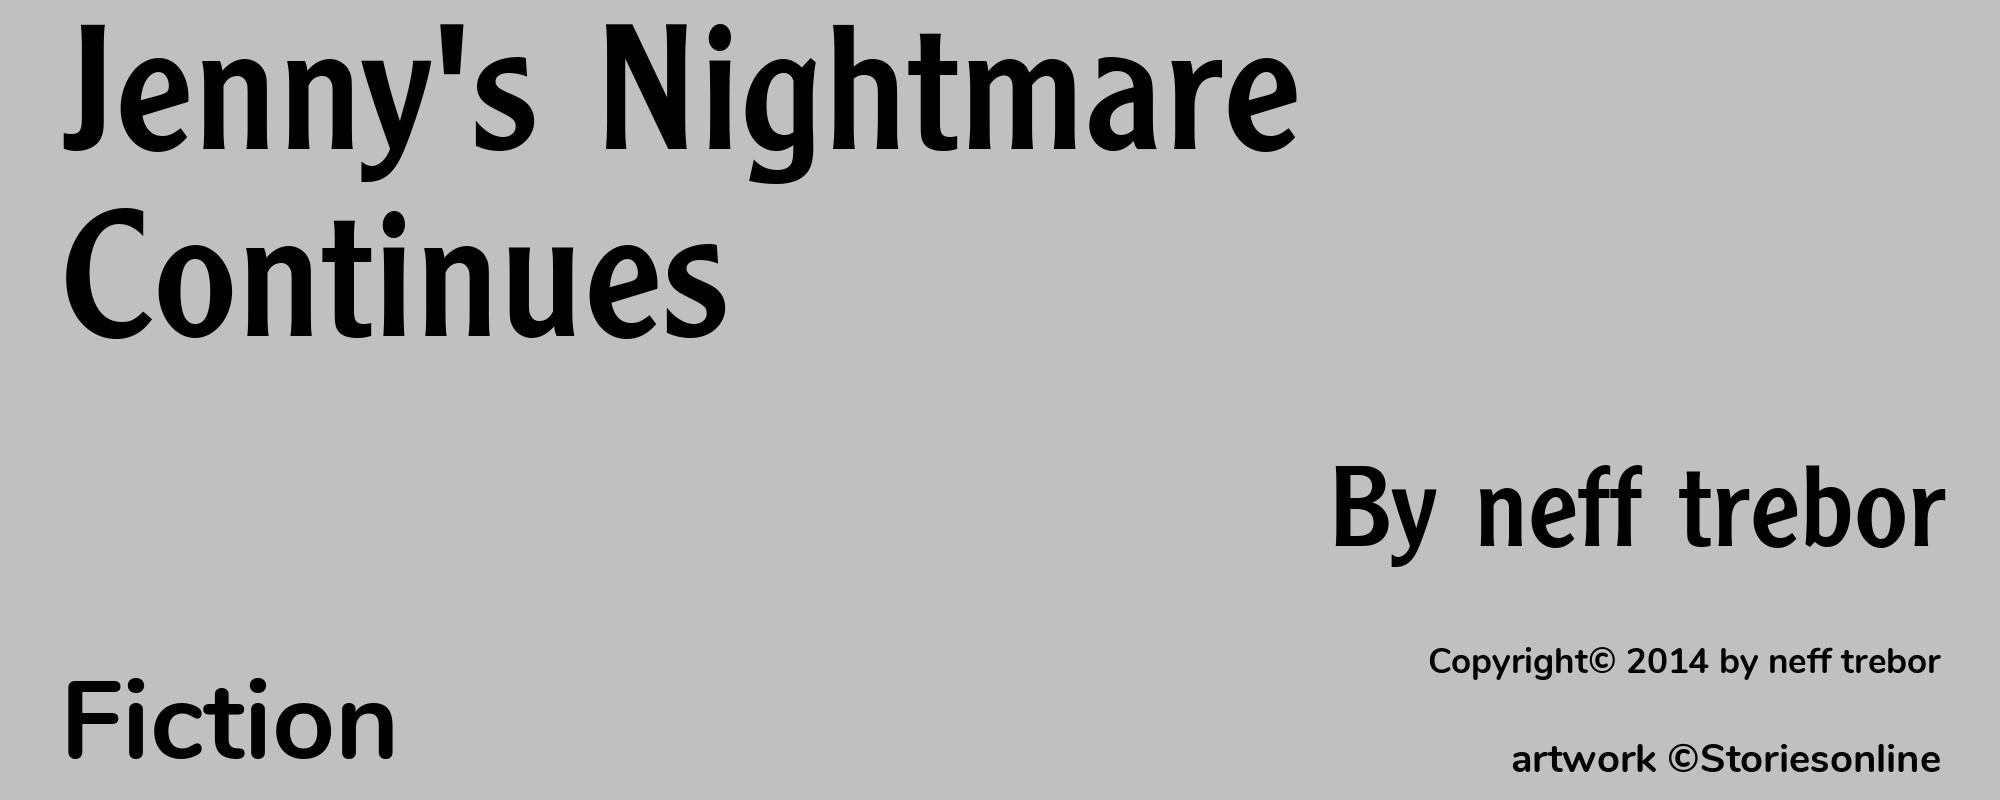 Jenny's Nightmare Continues - Cover